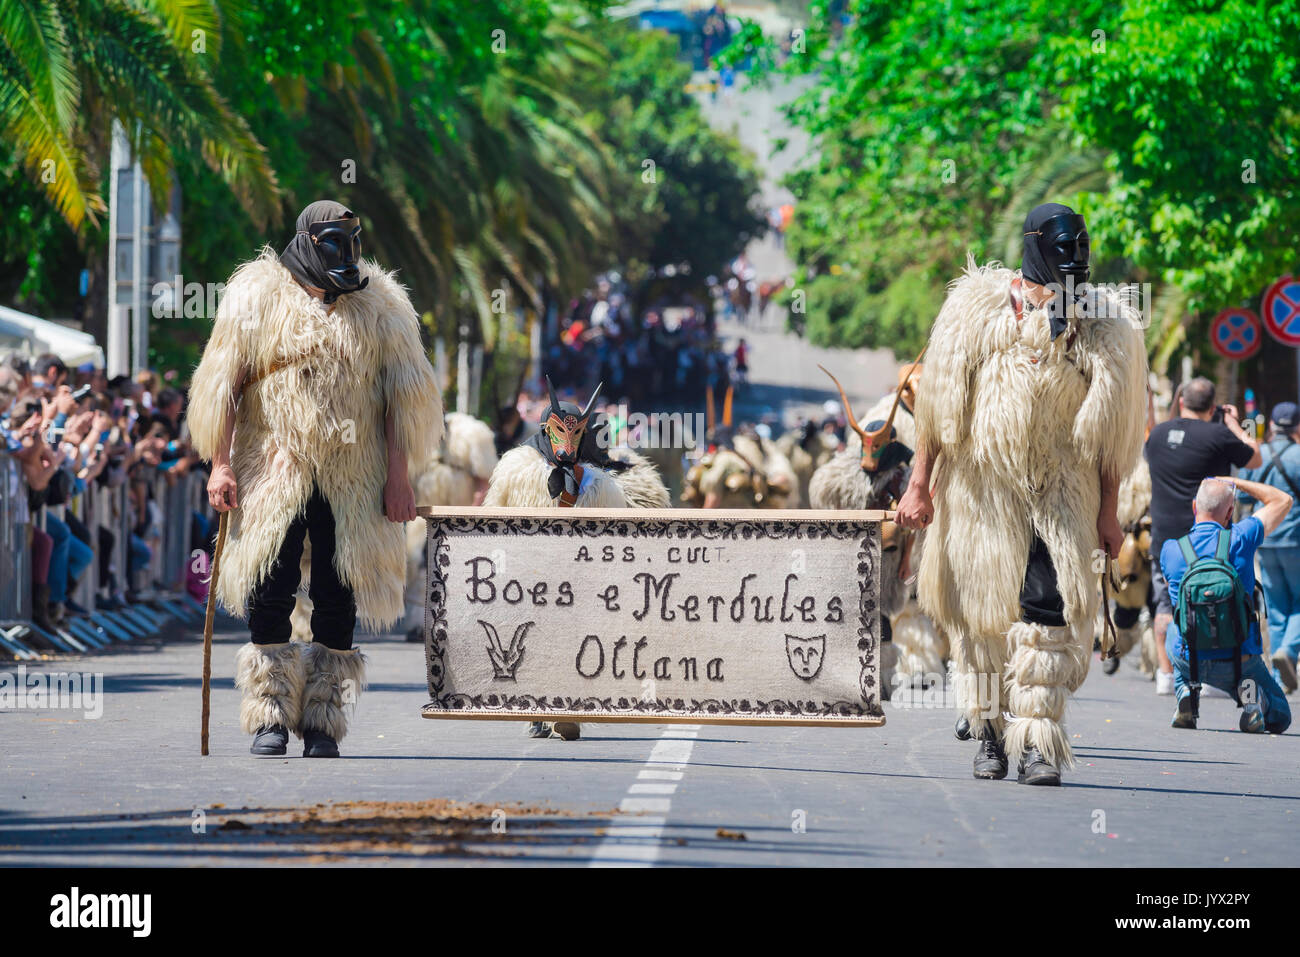 Sardinia traditional festival, men dressed as Boes and Merdules - traditional figures in sheepskins and masks, participate in La Cavalcata, Sassari. Stock Photo